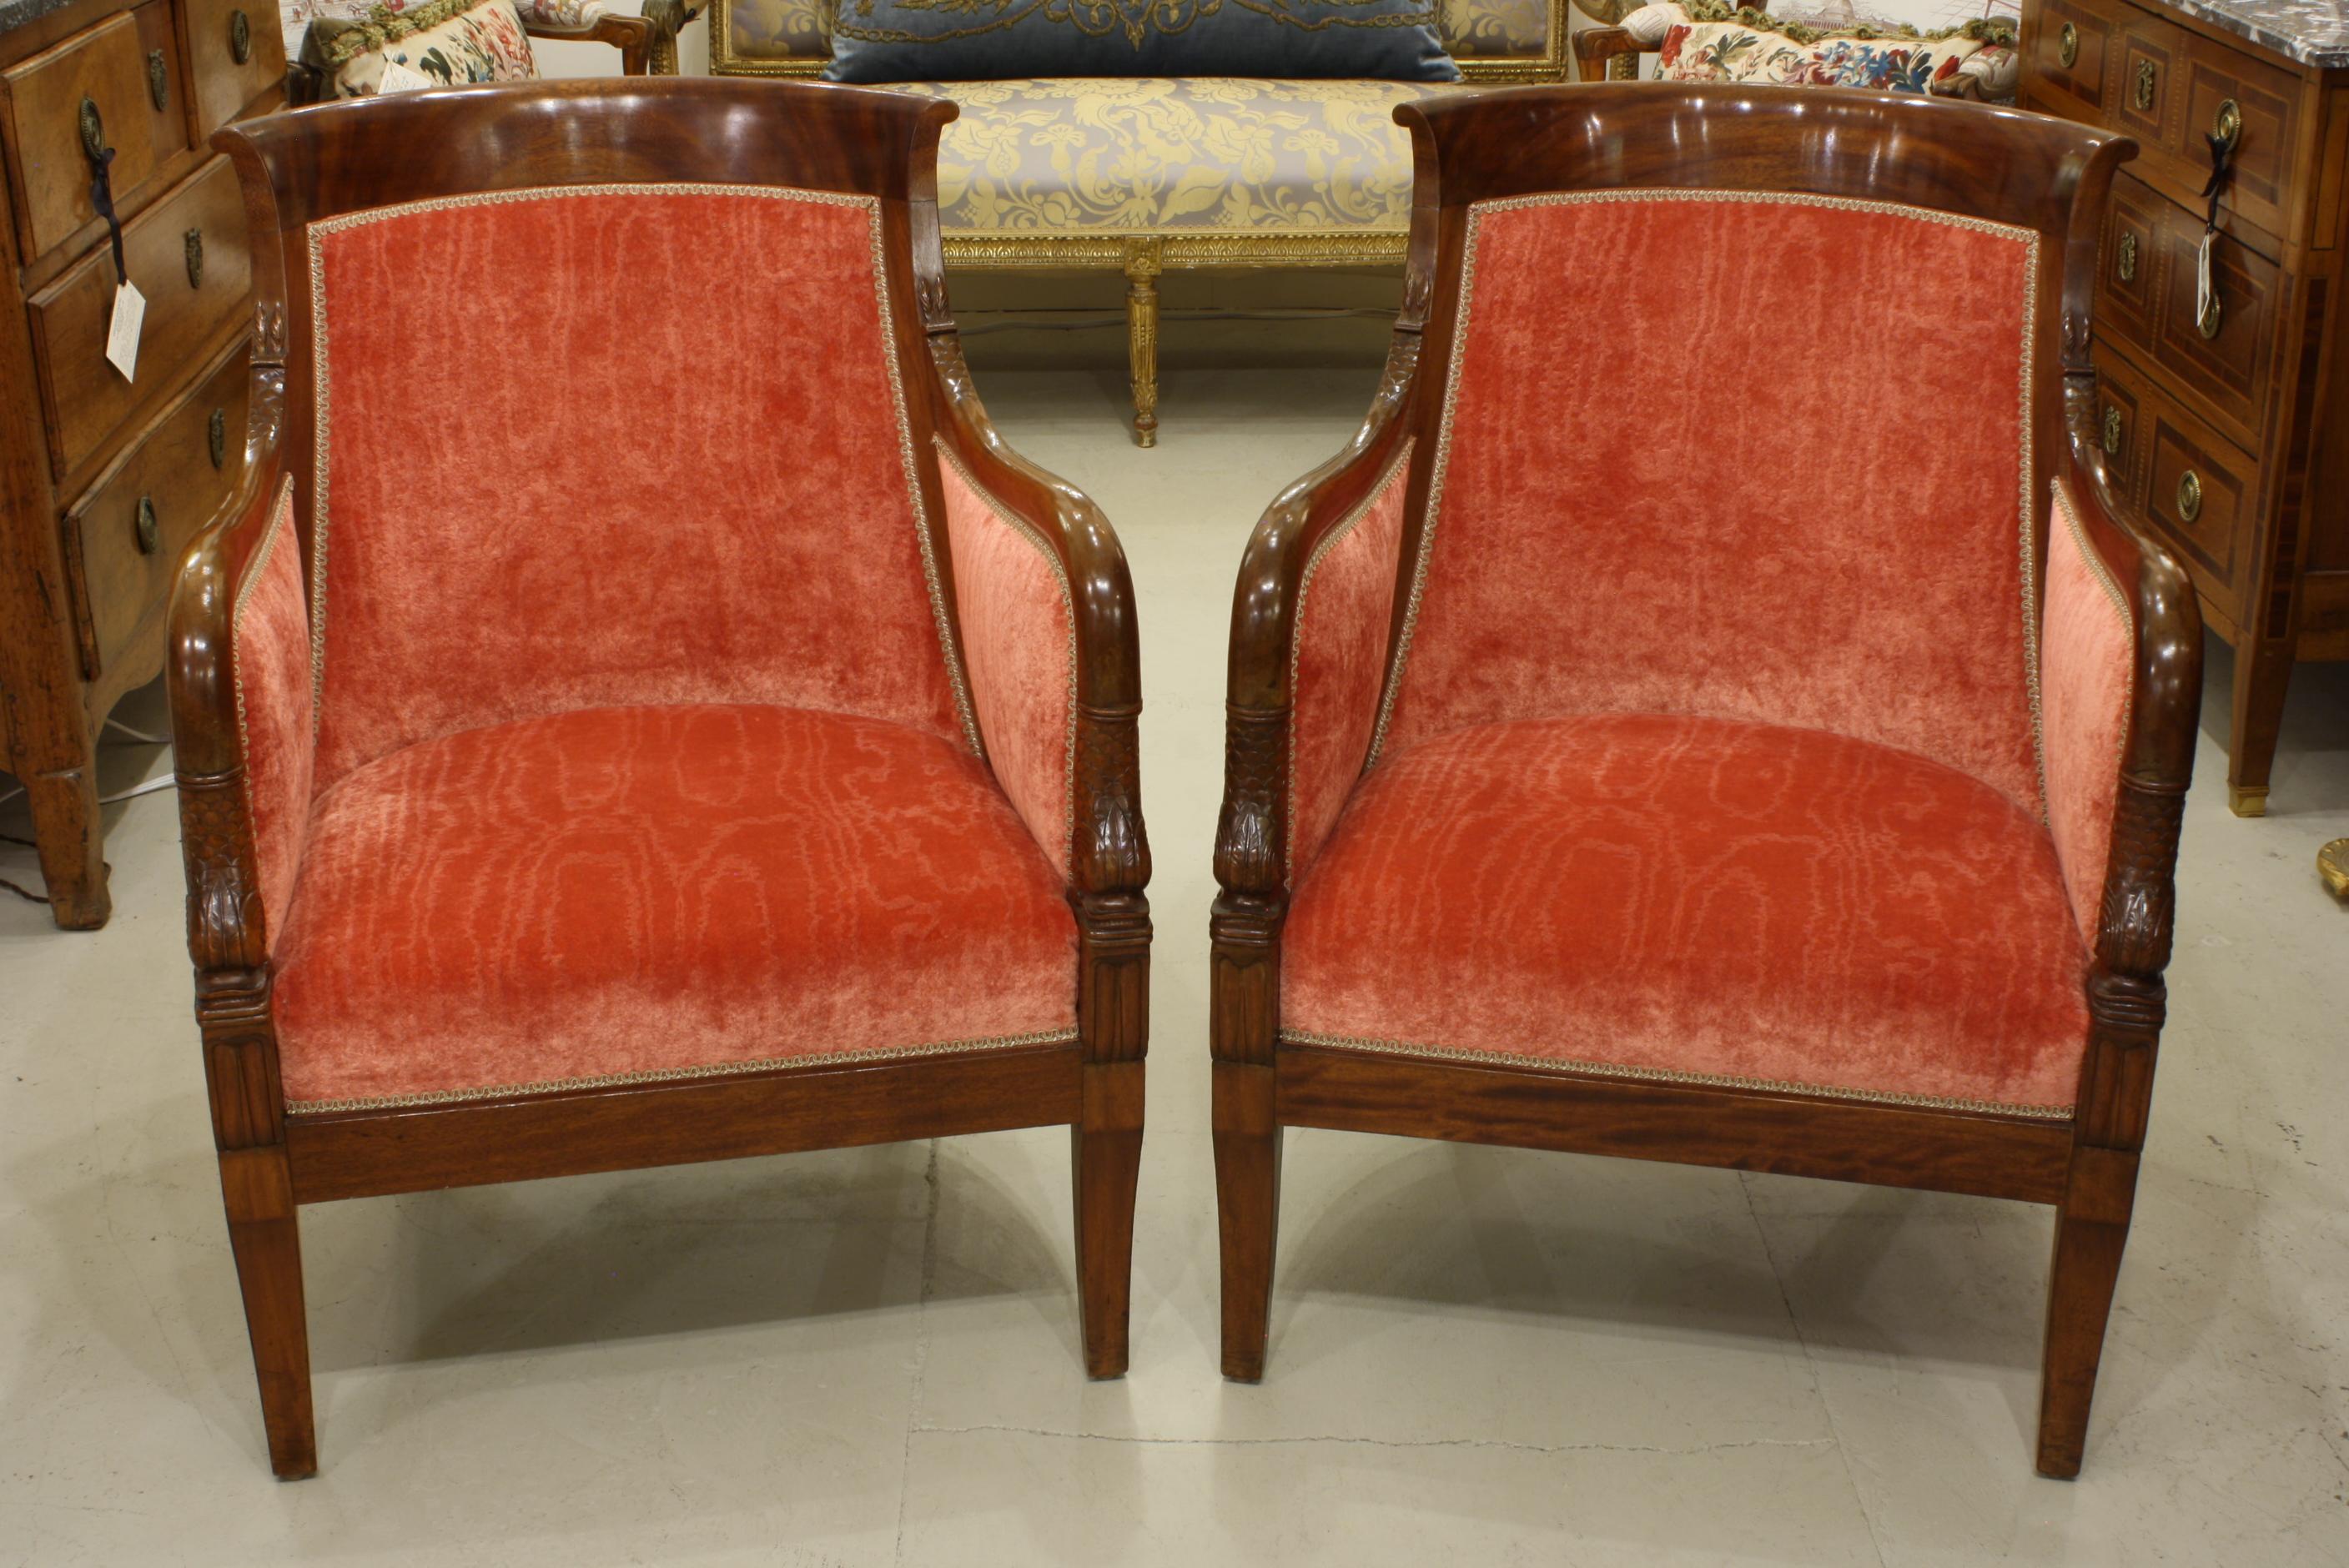 Pair of French Empire Style Mahogany Bergere Armchairs with Dolphins (Französisch)